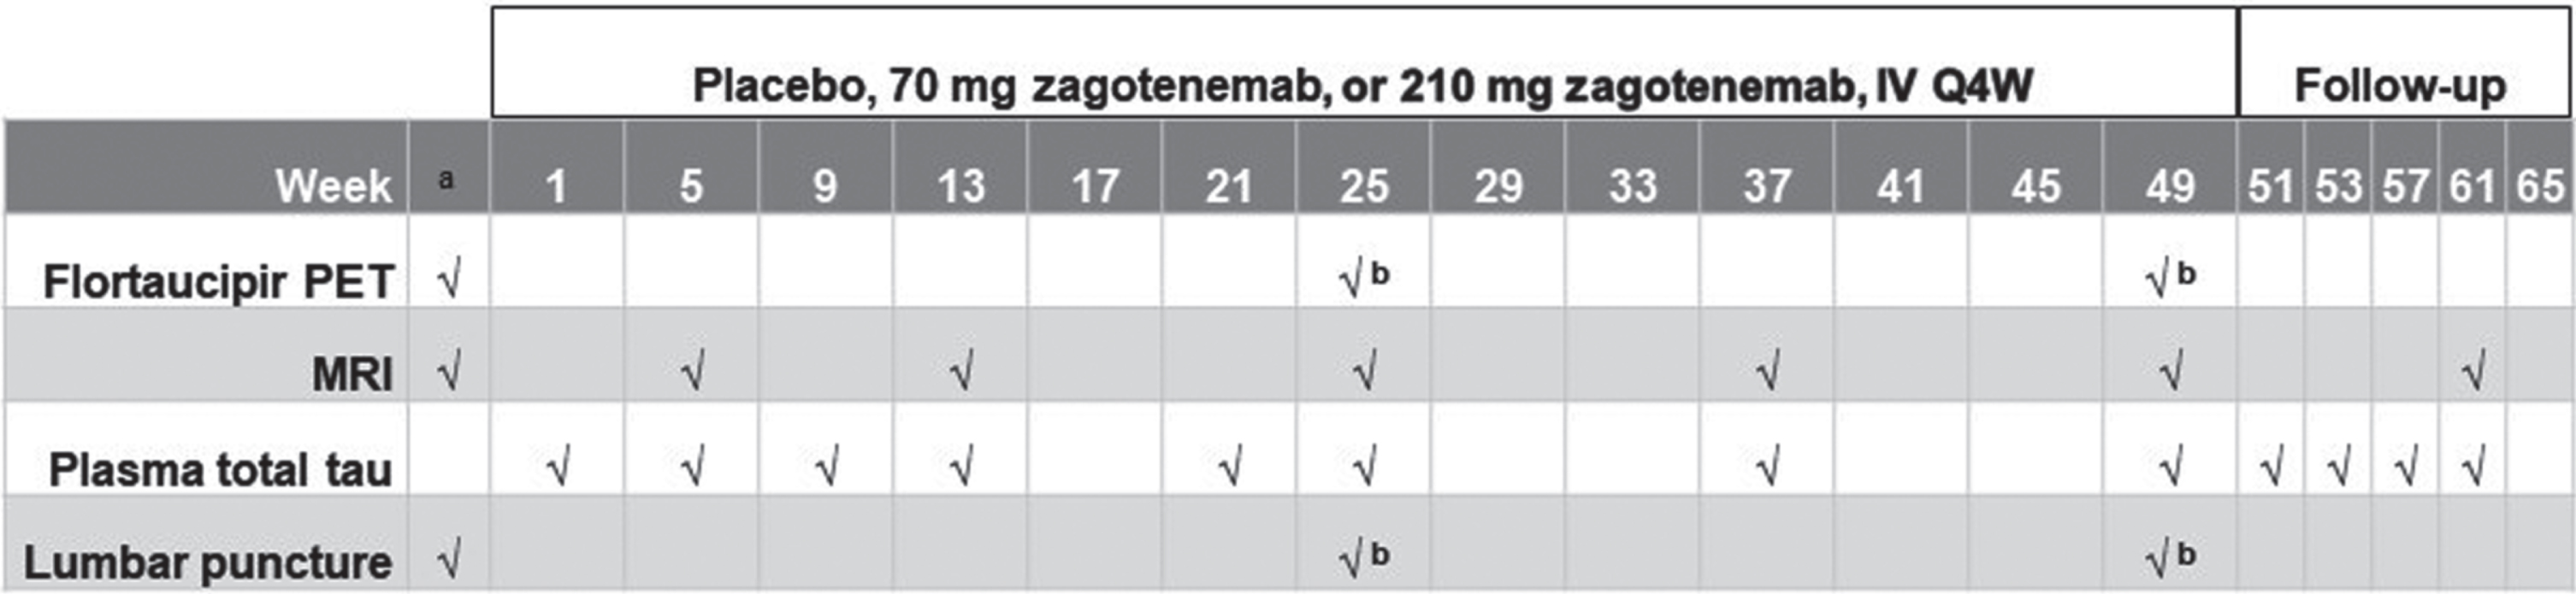 Illustration of study design. aBefore first dose (including screening). bConducted at Week 25 should the participant follow the 25-week treatment regimen or at Week 49 for the 49-week treatment regimen. Only the 49-week treatment scheme is shown. The 210 mg cohort was initiated following a review of the safety data from the 70 mg cohort. IV, intravenous; MRI, magnetic resonance imaging; PET, positron emission tomography; Q4 W, every four weeks.